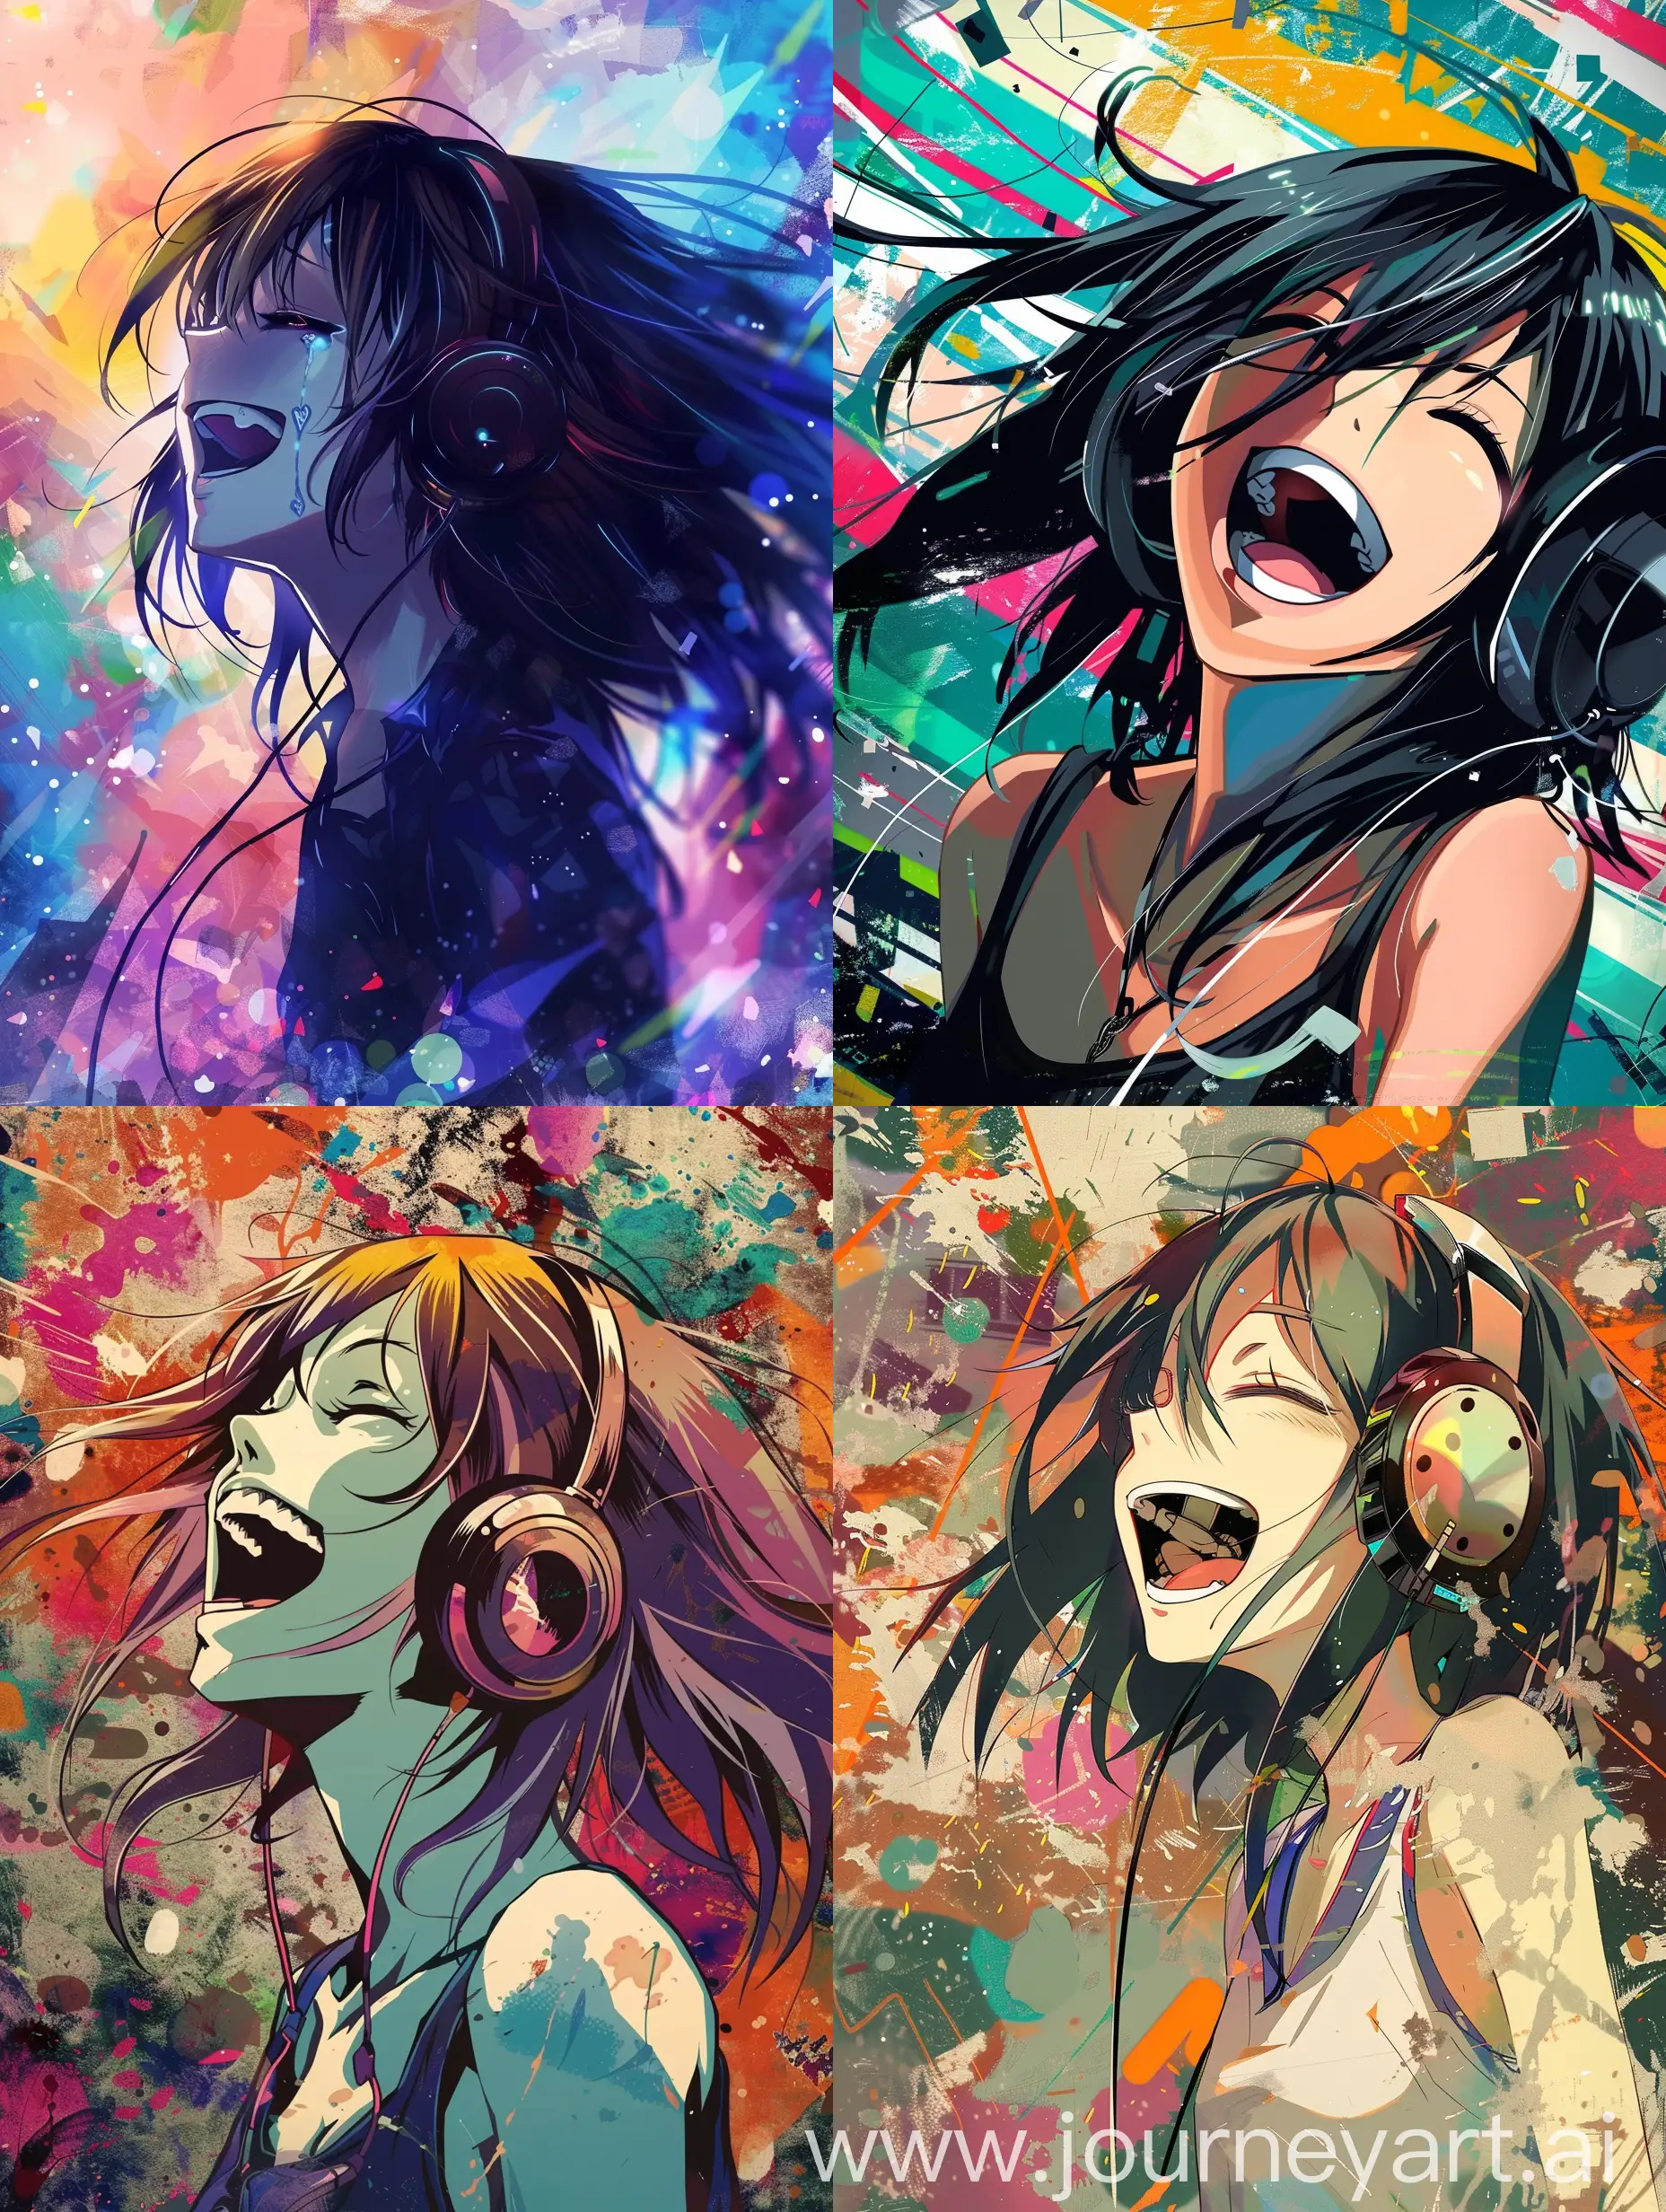 anime emo girl laughing, she wearing a headphones, with abstract background